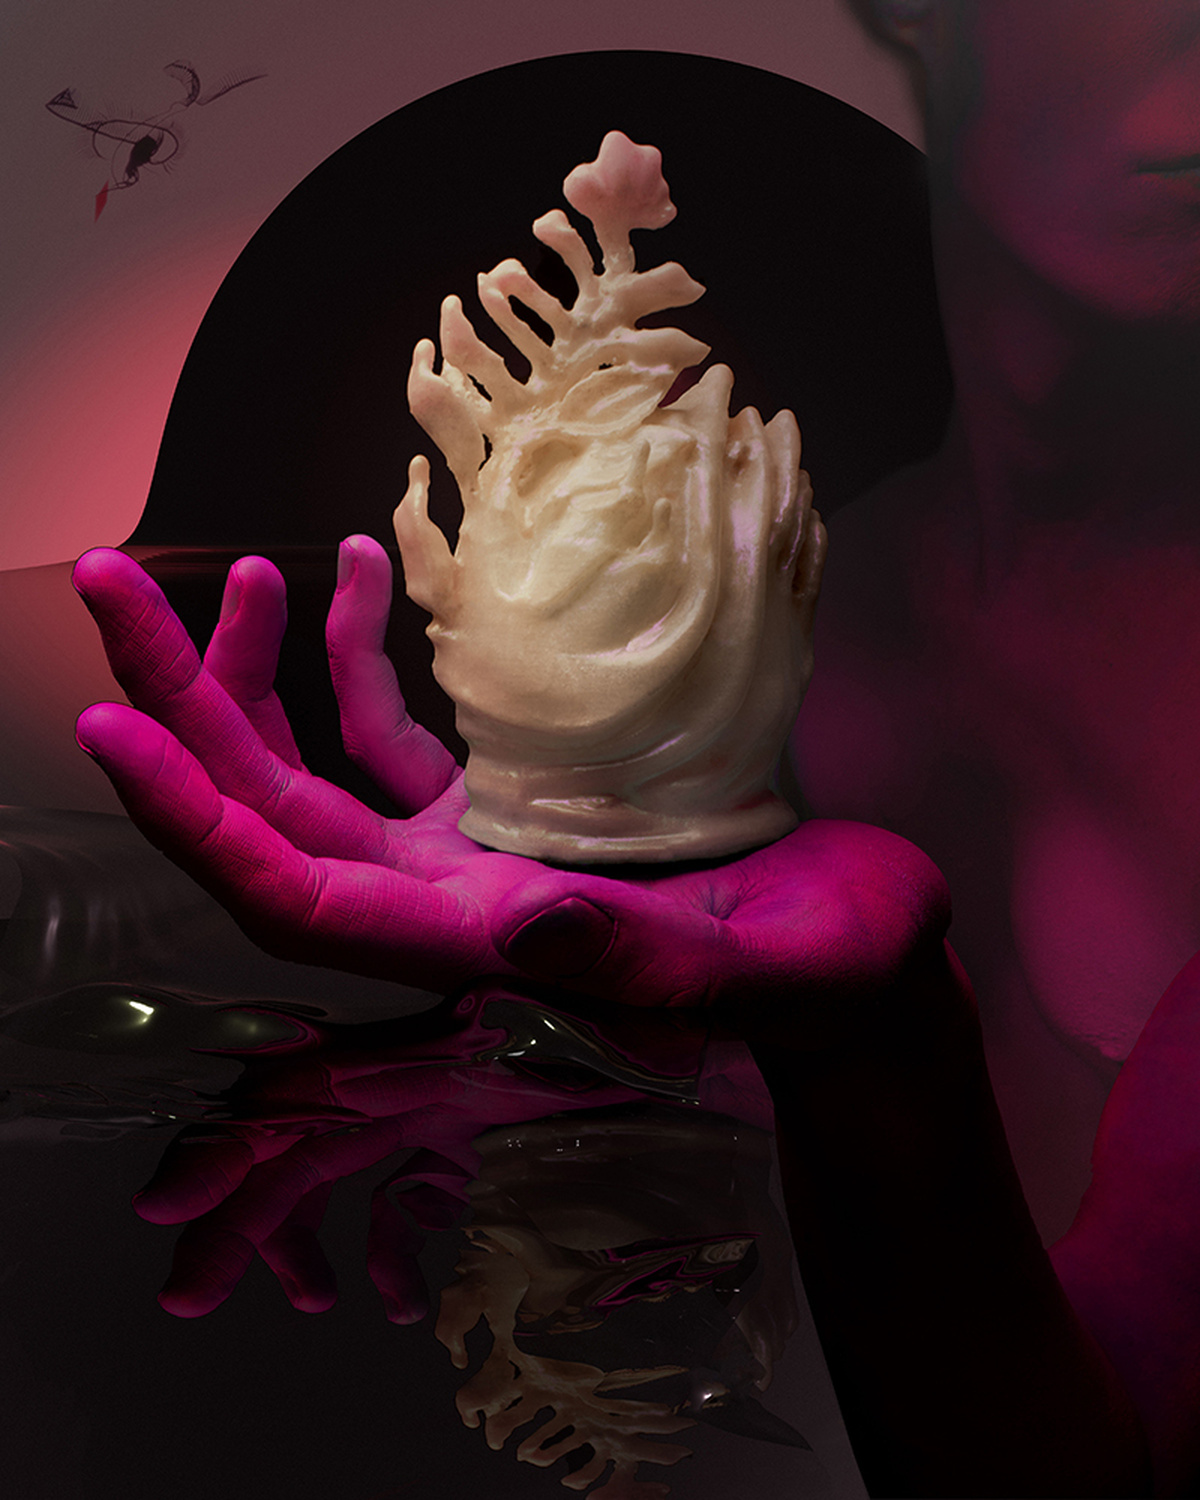 A digital collage with a purple hand in the centre holding up a digital object which looks reminiscent of a conch shell.